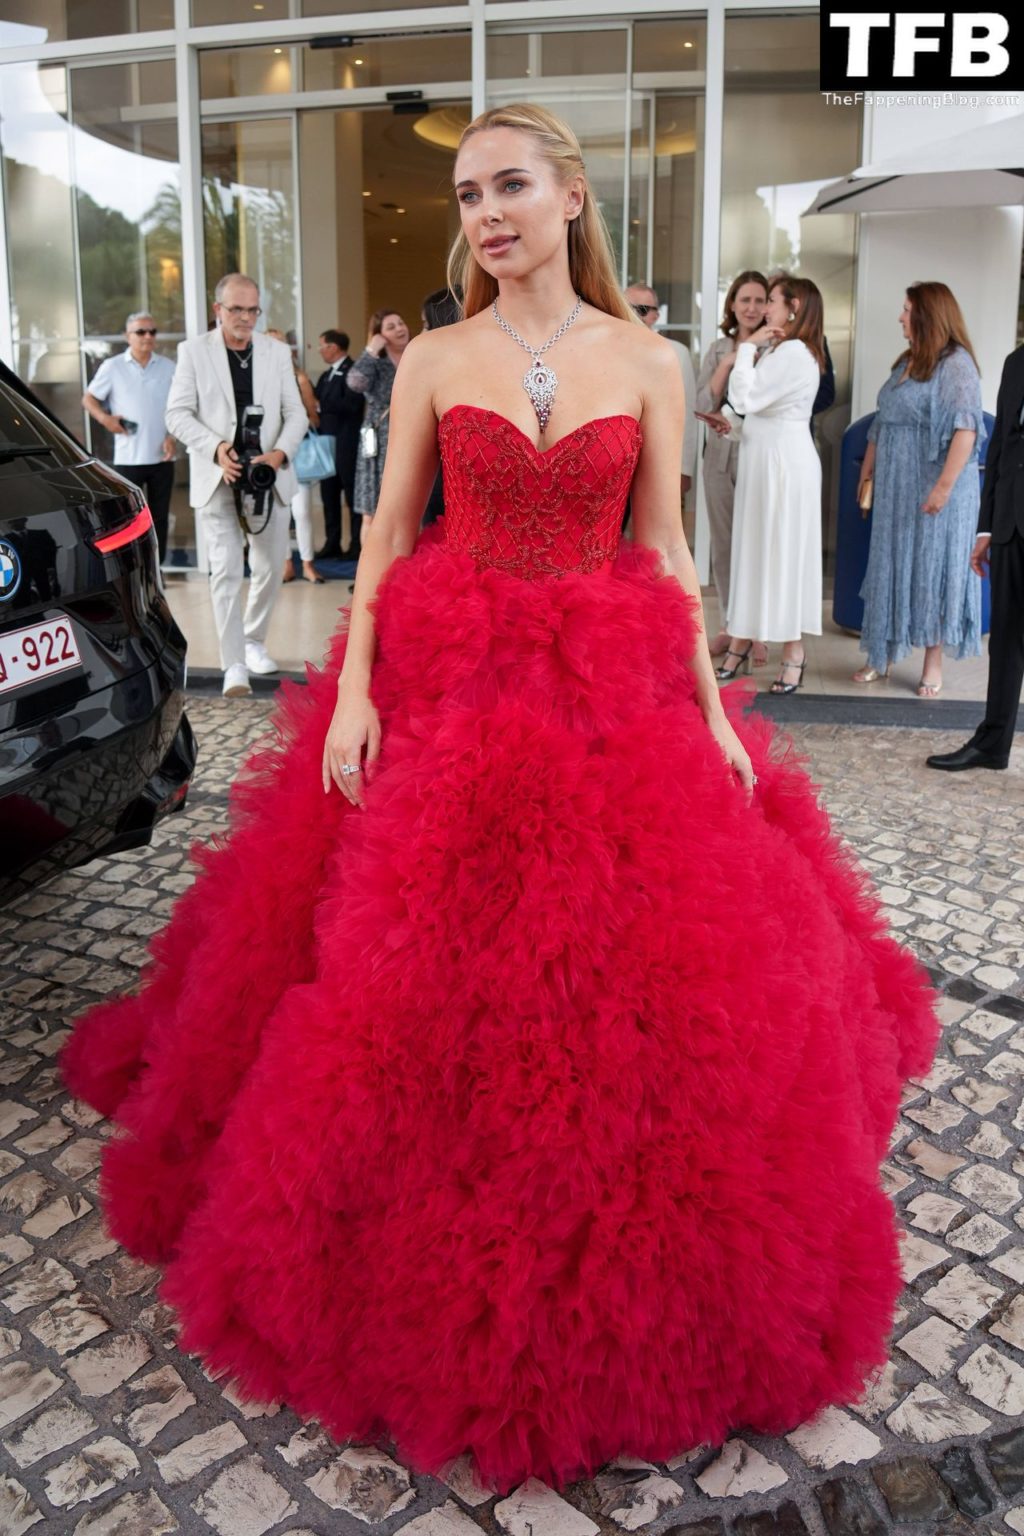 Kimberley Garner Sexy The Fappening Blog 132 1024x1536 - Kimberley Garner Looks Hot in a Red Dress at the 75th Annual Cannes Film Festival (134 Photos)